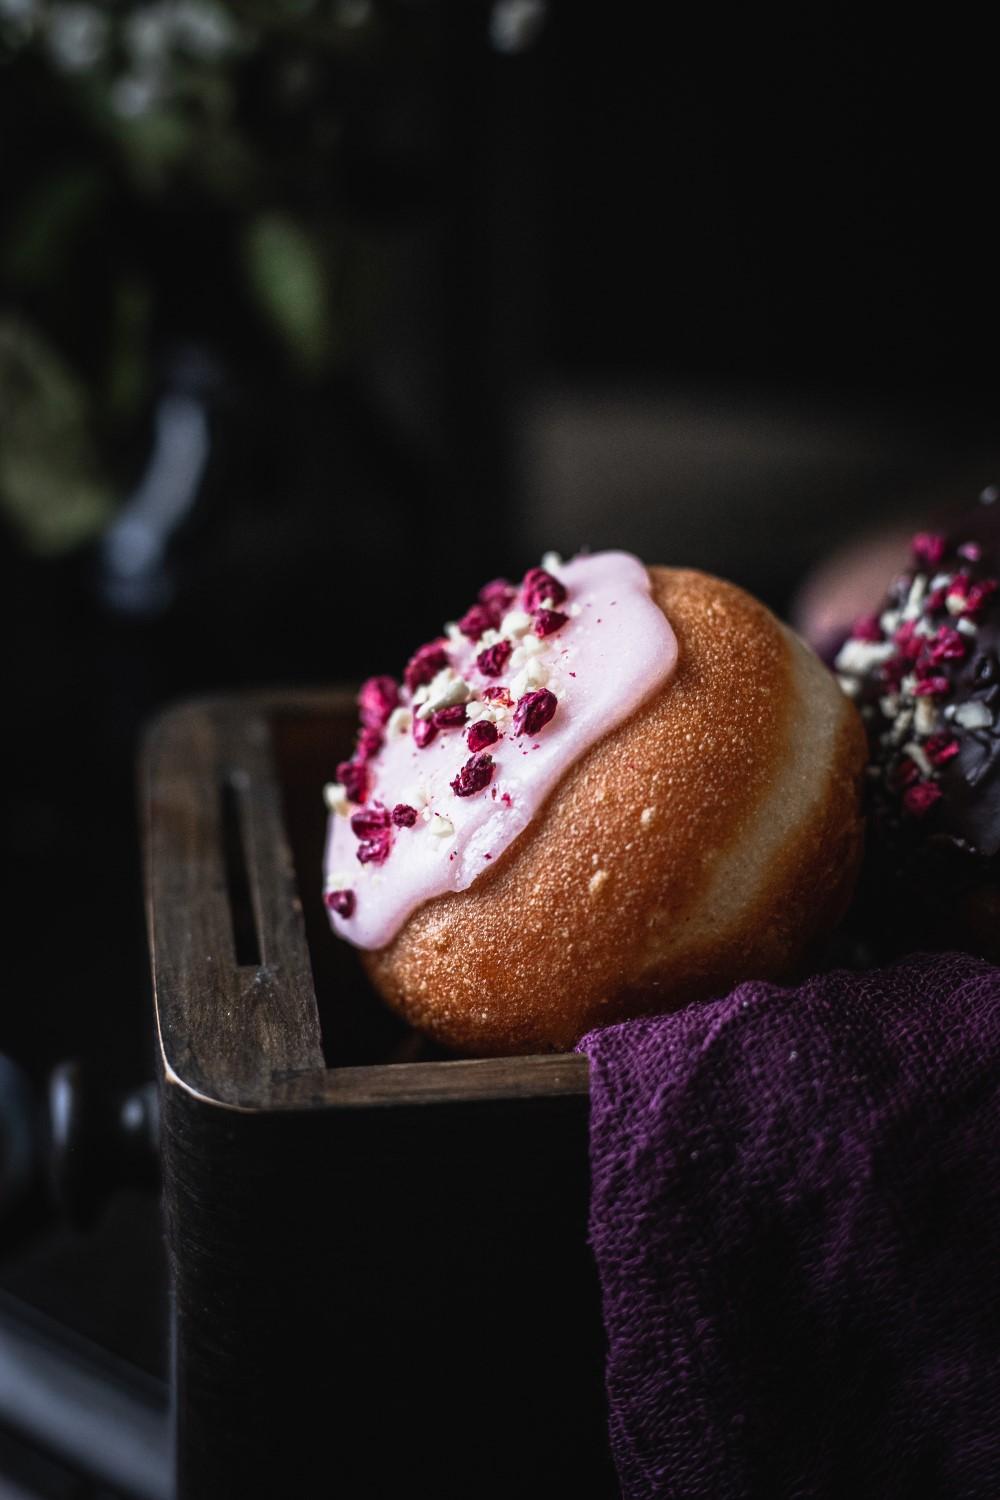 Once you've tasted these irresistibly soft and fluffy sourdough doughnuts, you'll never try any other! This one and a half day recipe is well worth the time it takes.